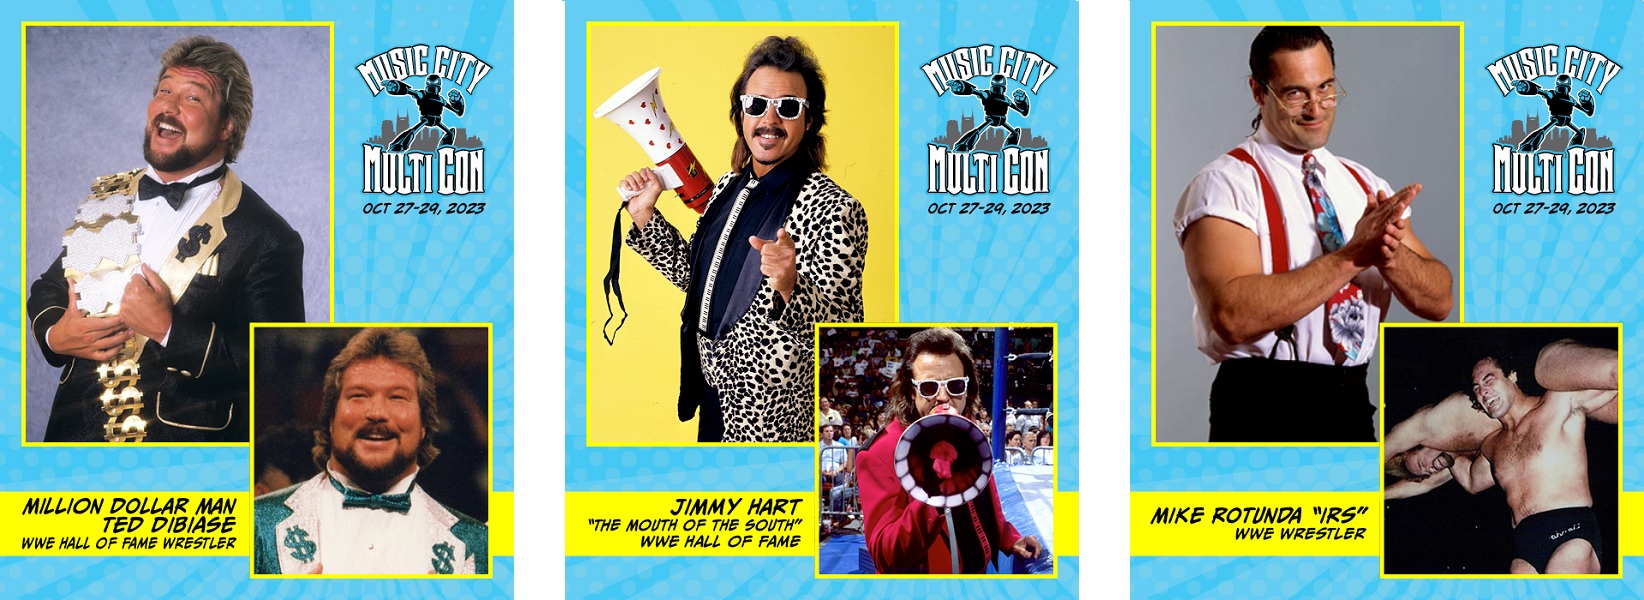 Money, Inc, Ted DiBiase, Mike Rotunda, Jimmy Hart - Music City Multi Con Guests